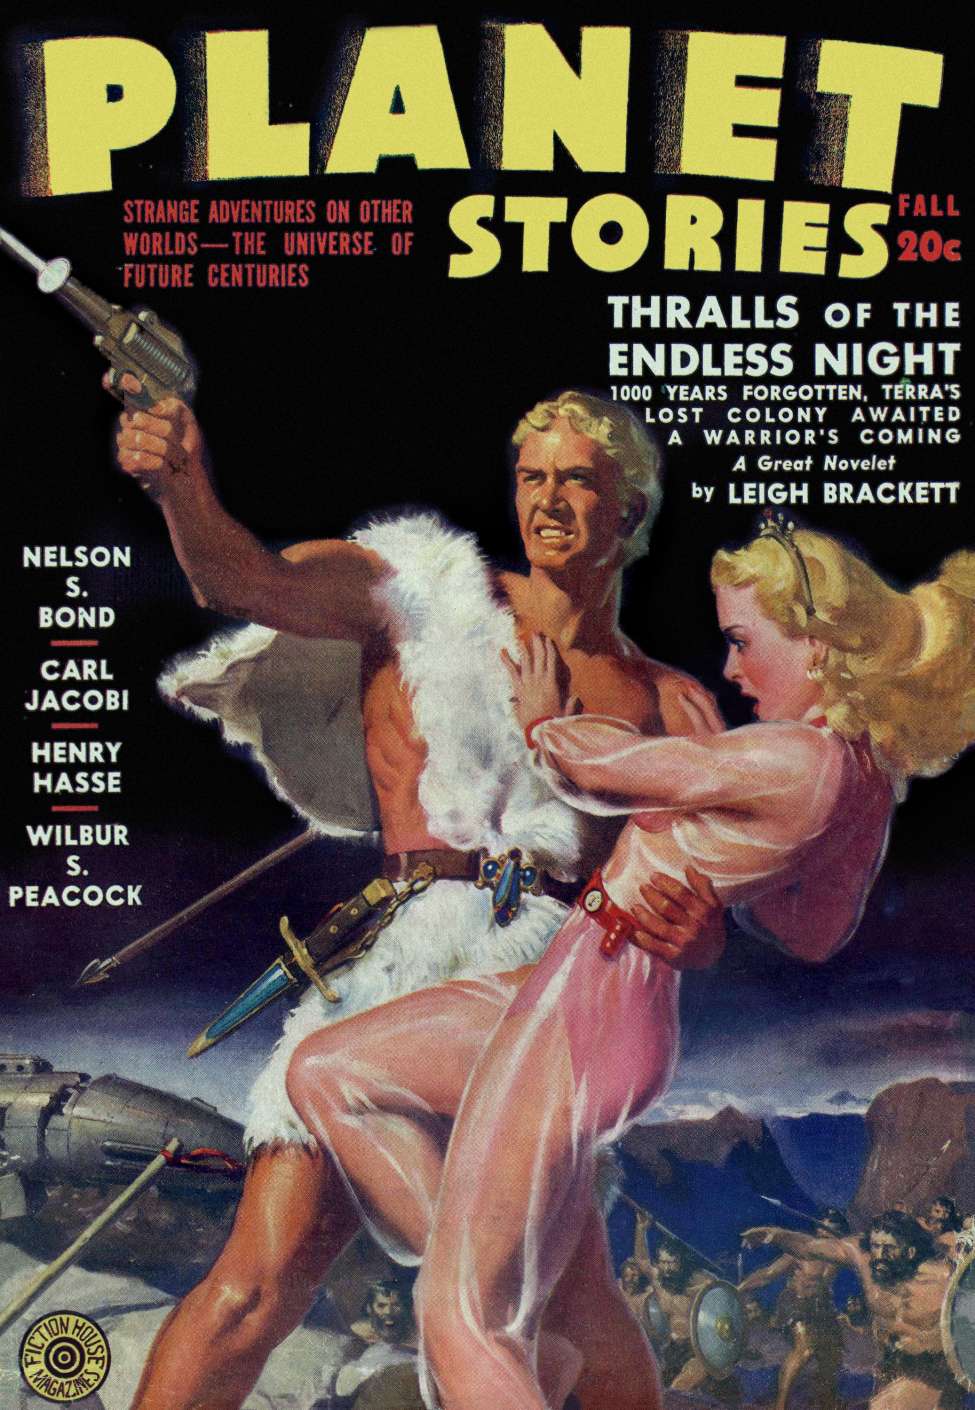 Comic Book Cover For Planet Stories v2 4 - Thralls of the Endless Night - Leigh Brackett